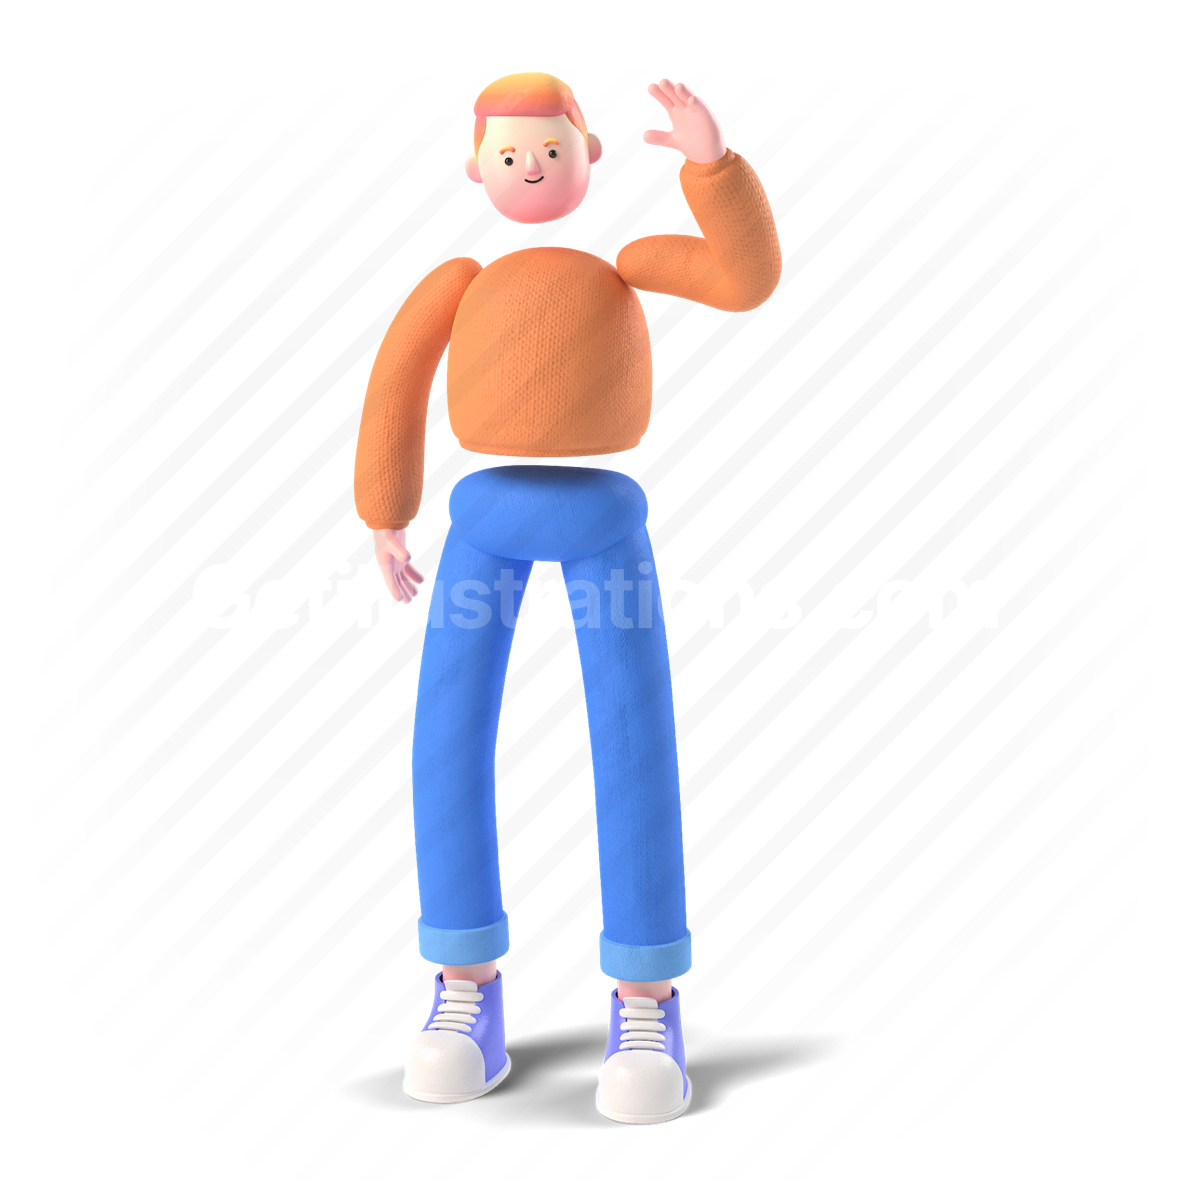 3d, people, person, character, boy, ginger, wave, greeting, hello